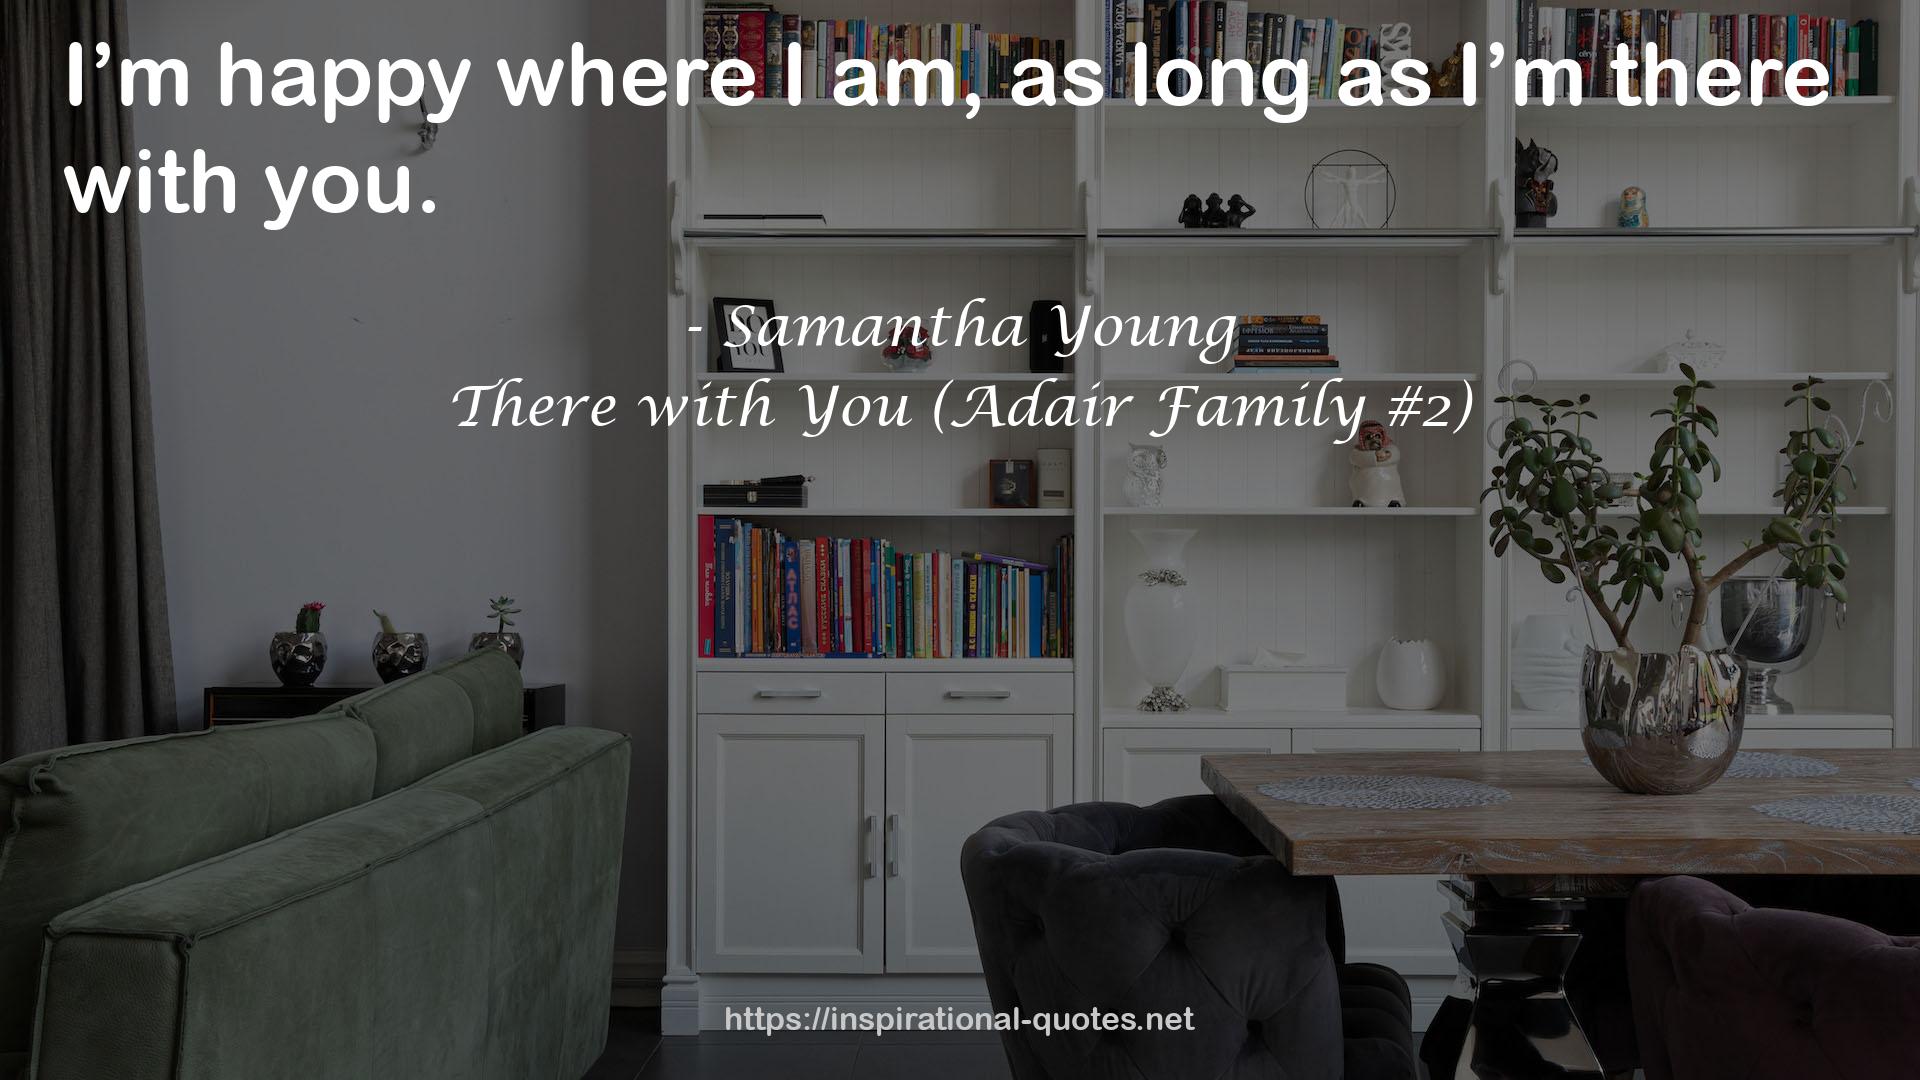 There with You (Adair Family #2) QUOTES